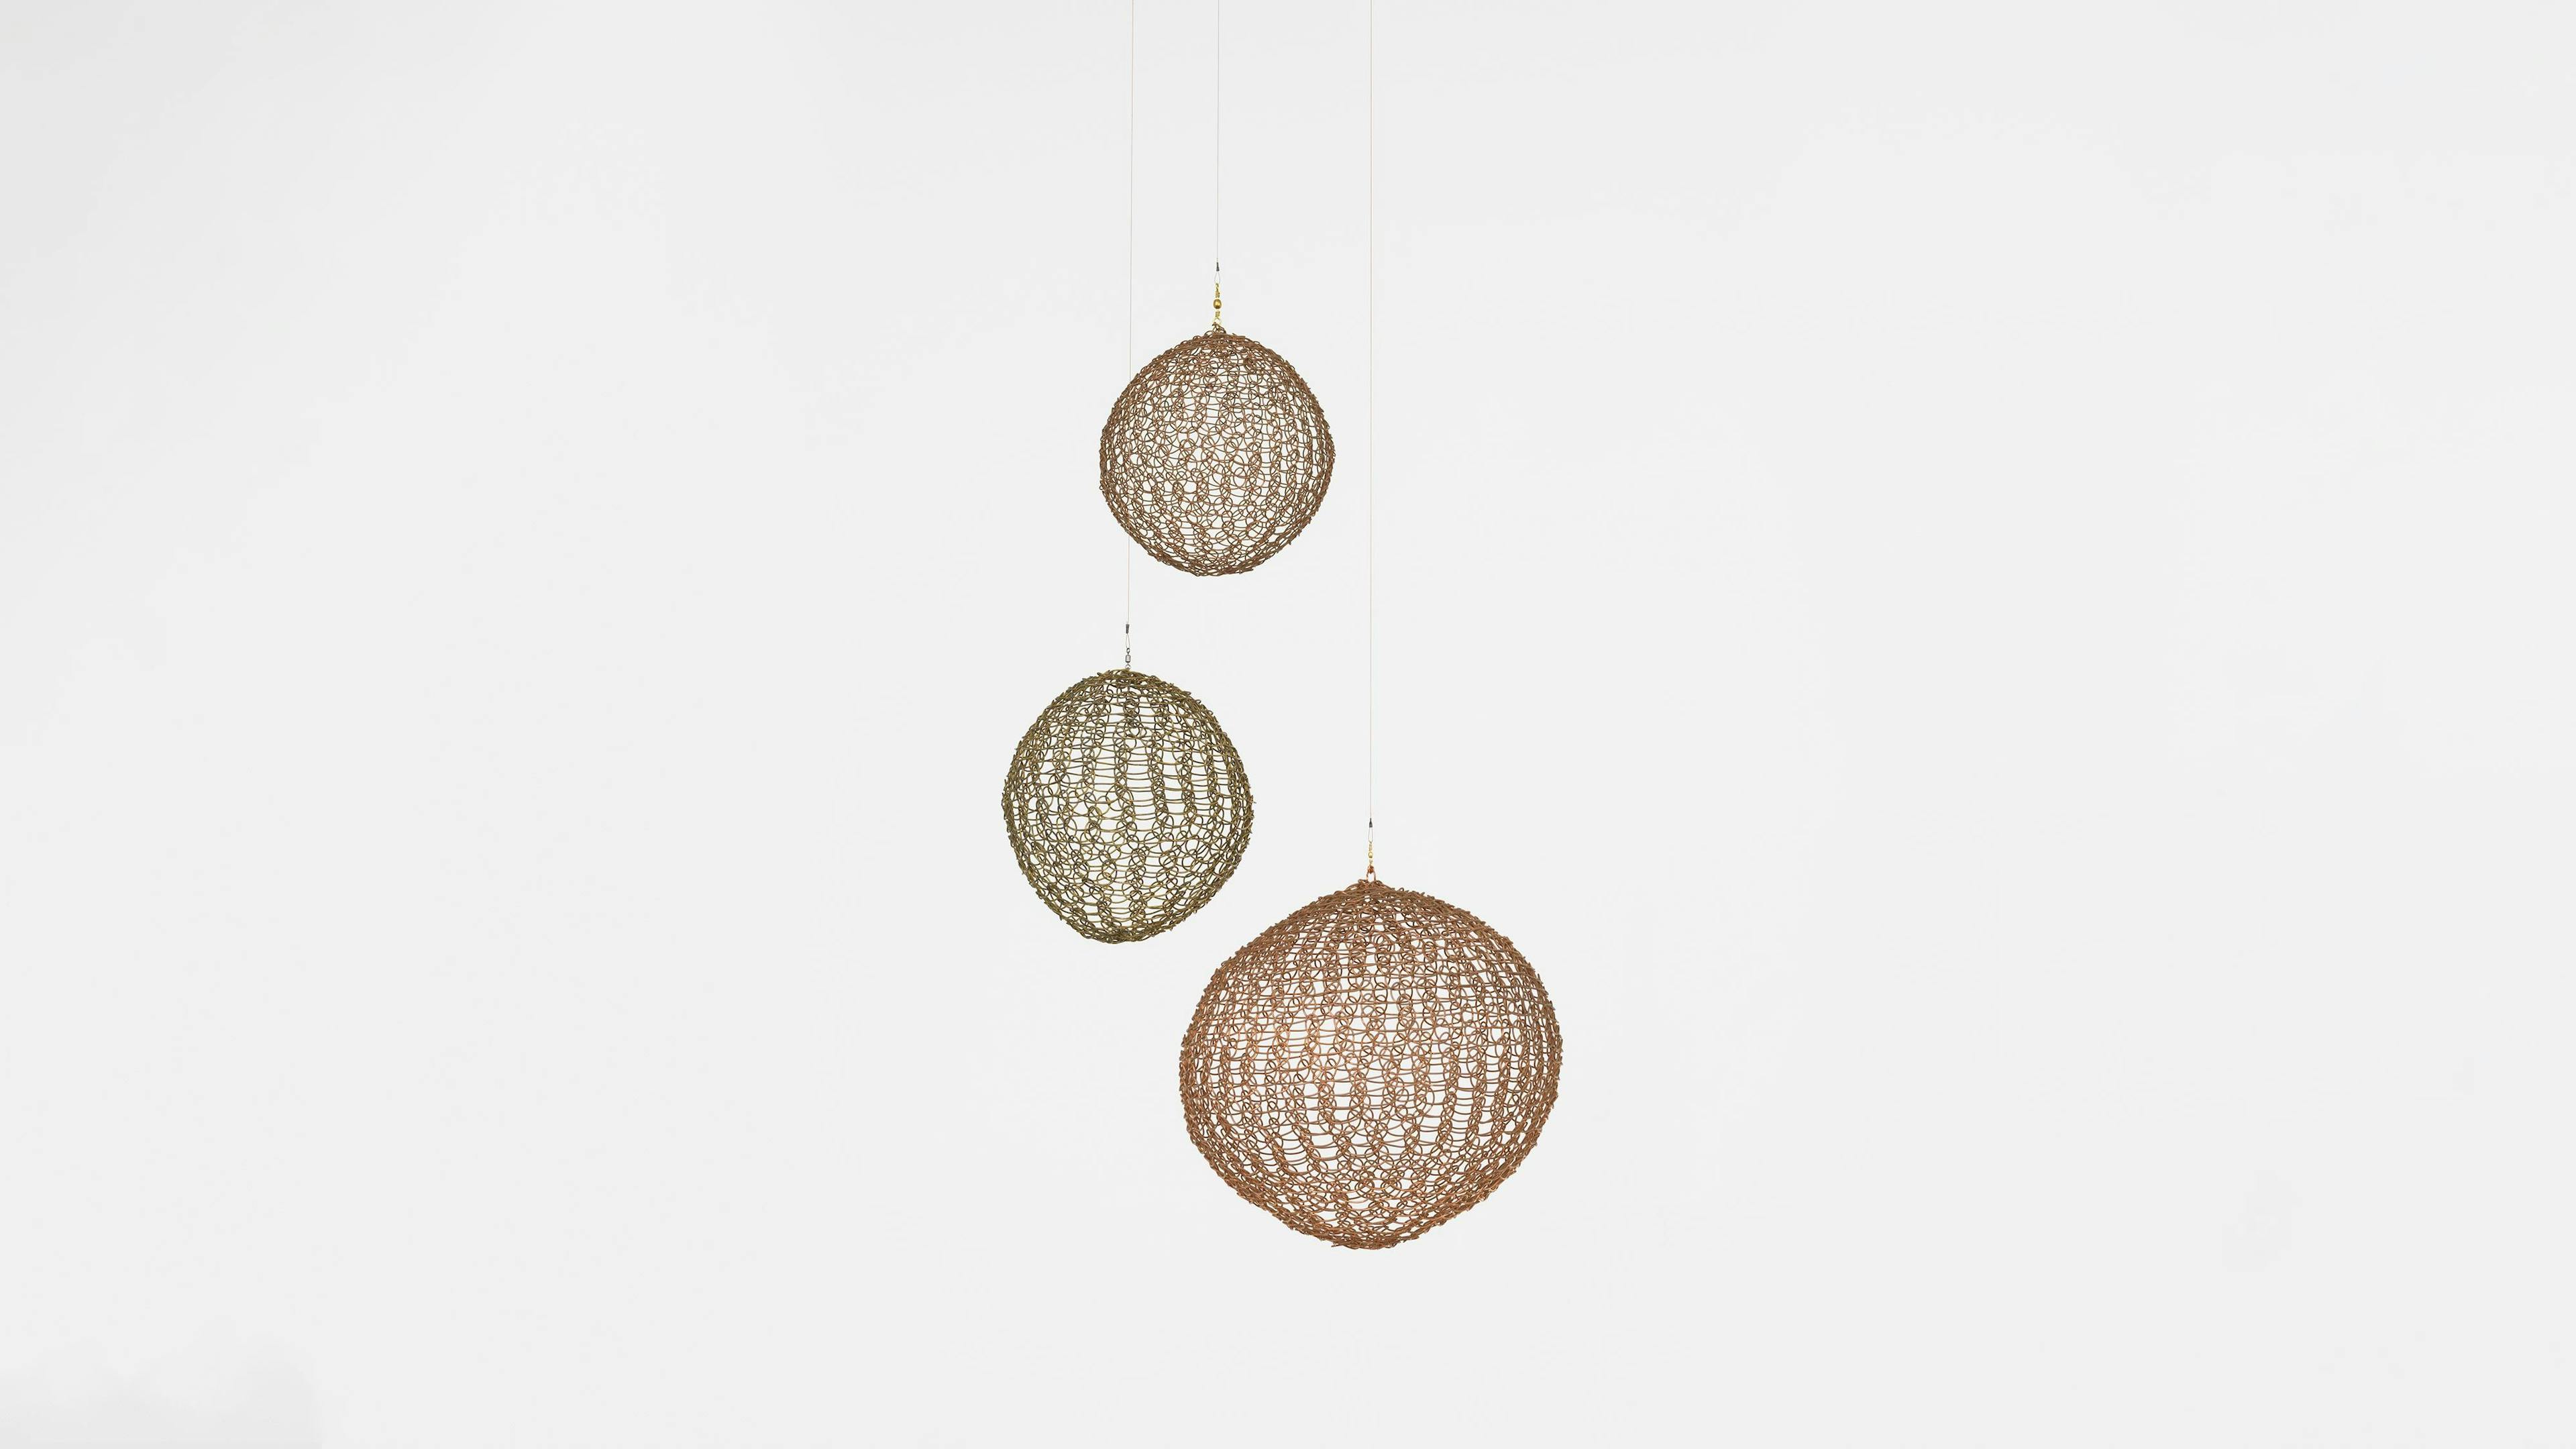 A mixed media artwork by Ruth Asawa, titled Untitled (S.759, Hanging Sphere), circa 1960 to 1969.